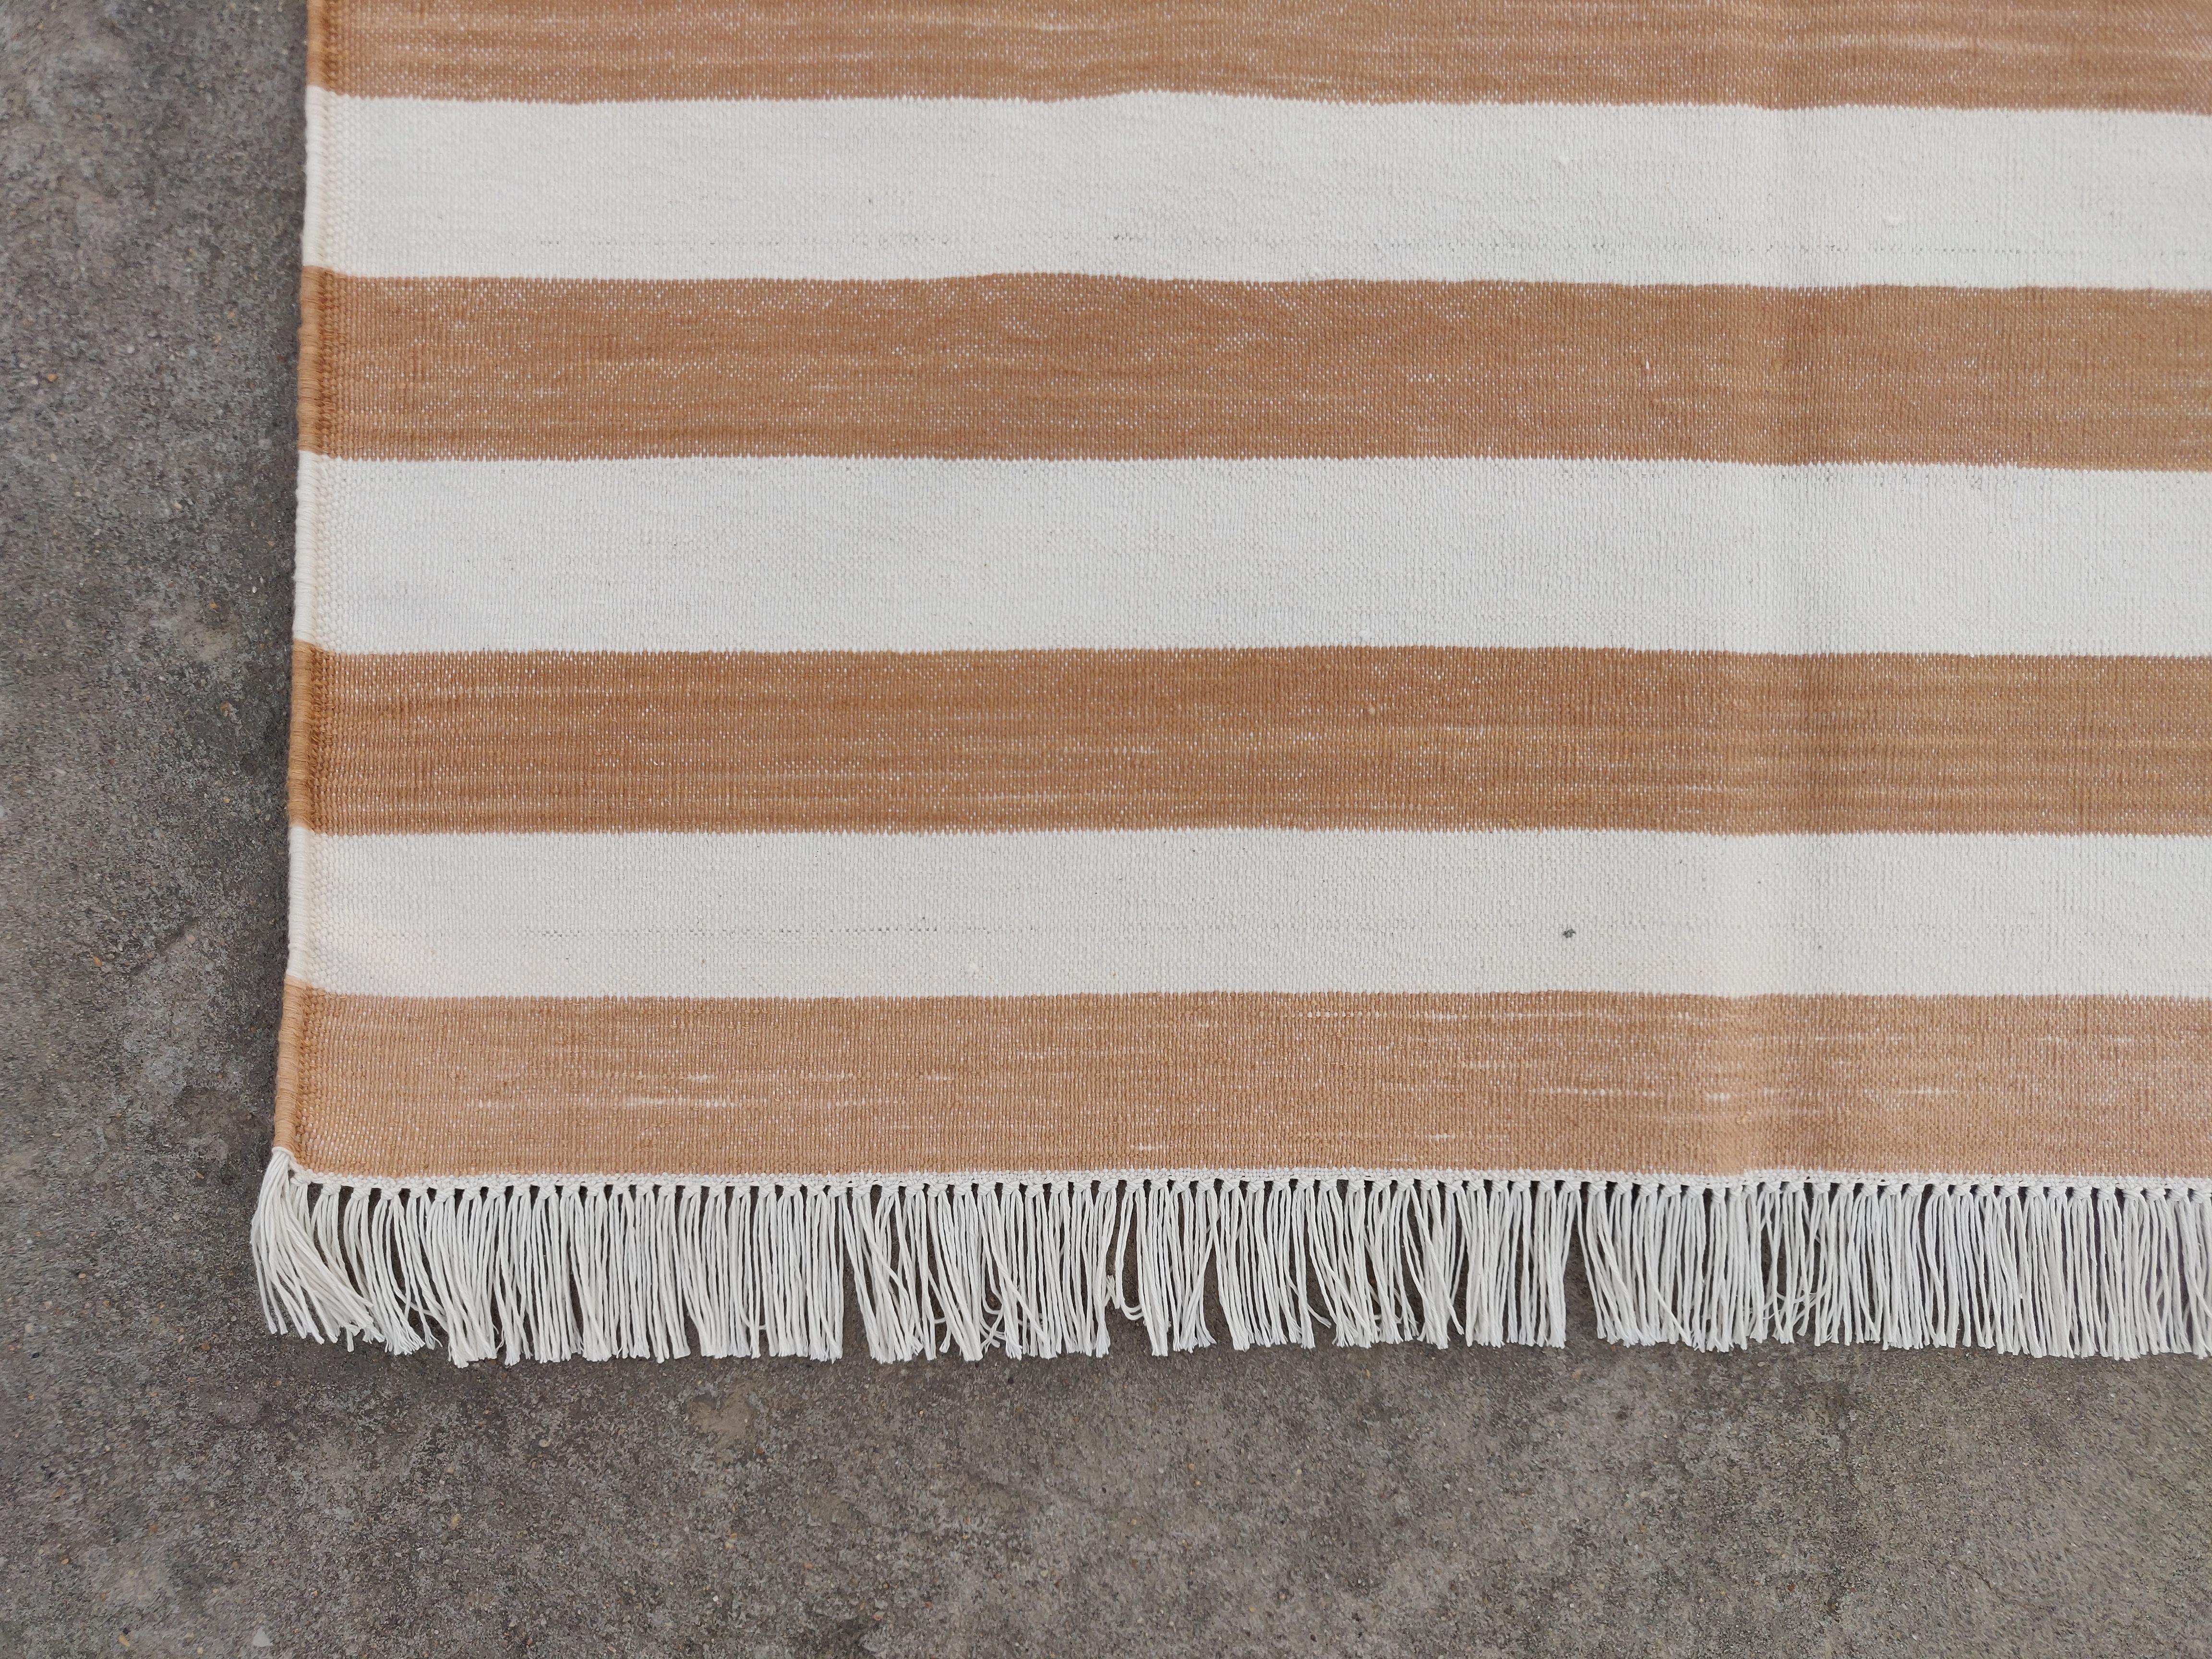 Handmade Cotton Area Flat Weave Rug, 6x9 Tan And White Striped Indian Dhurrie For Sale 1